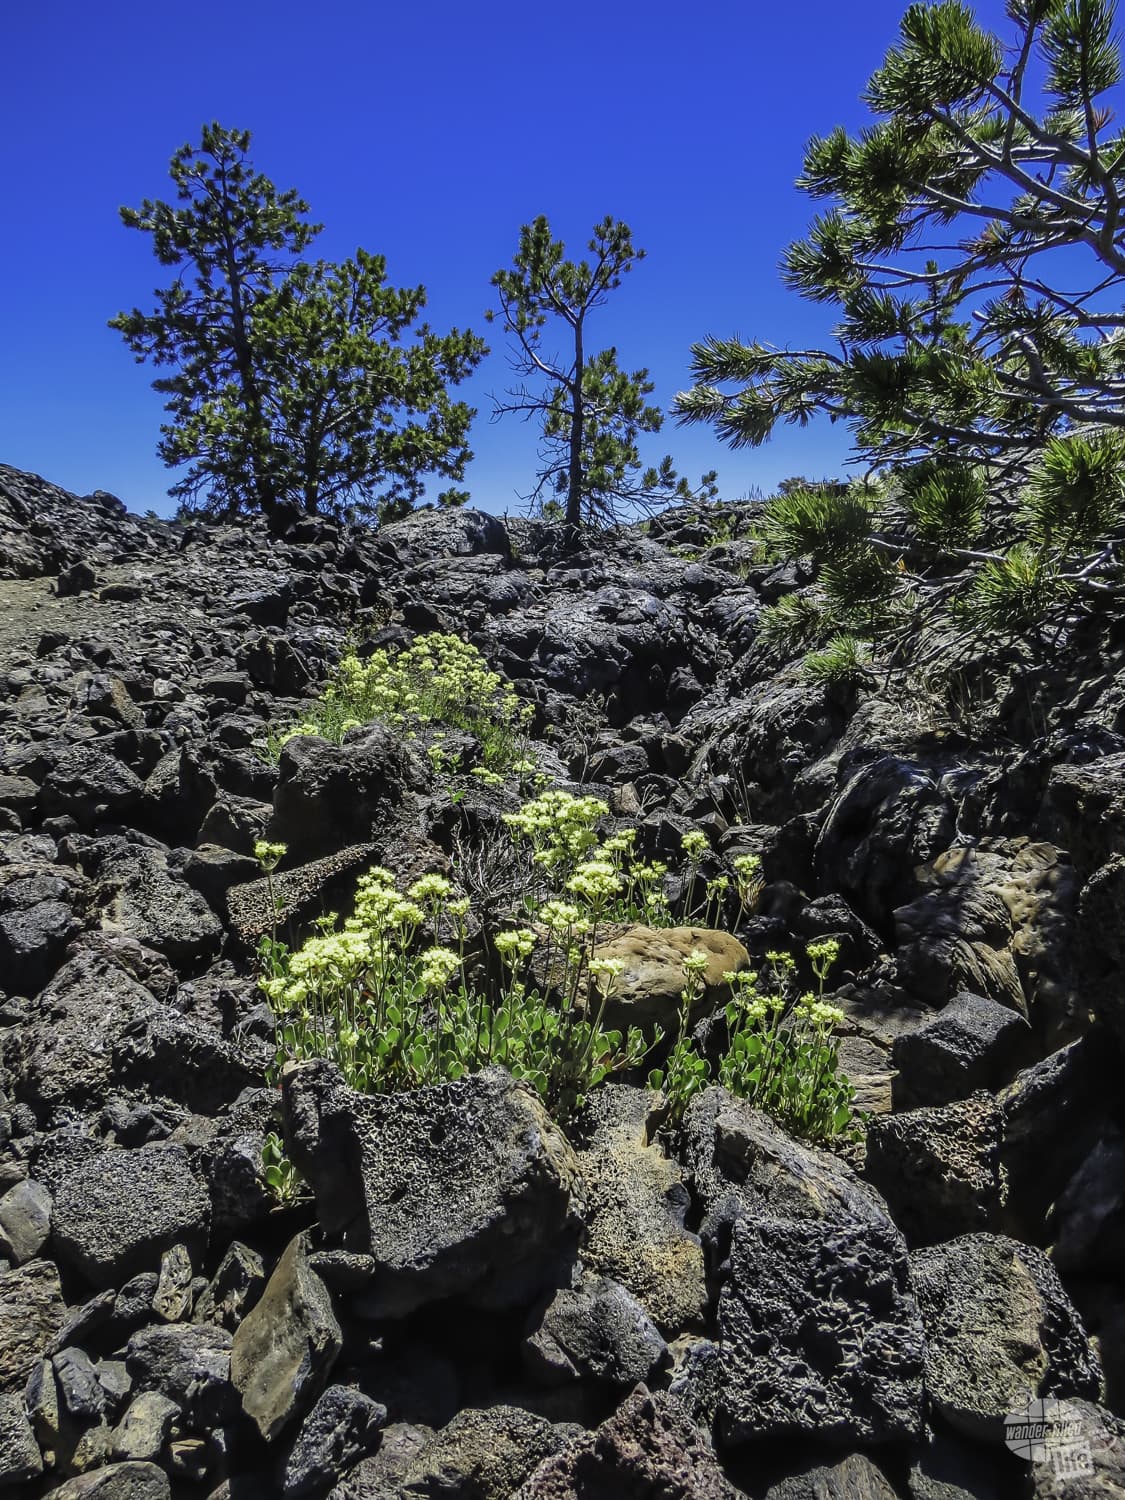 Trees and flowers in Craters of the Moon National Monument